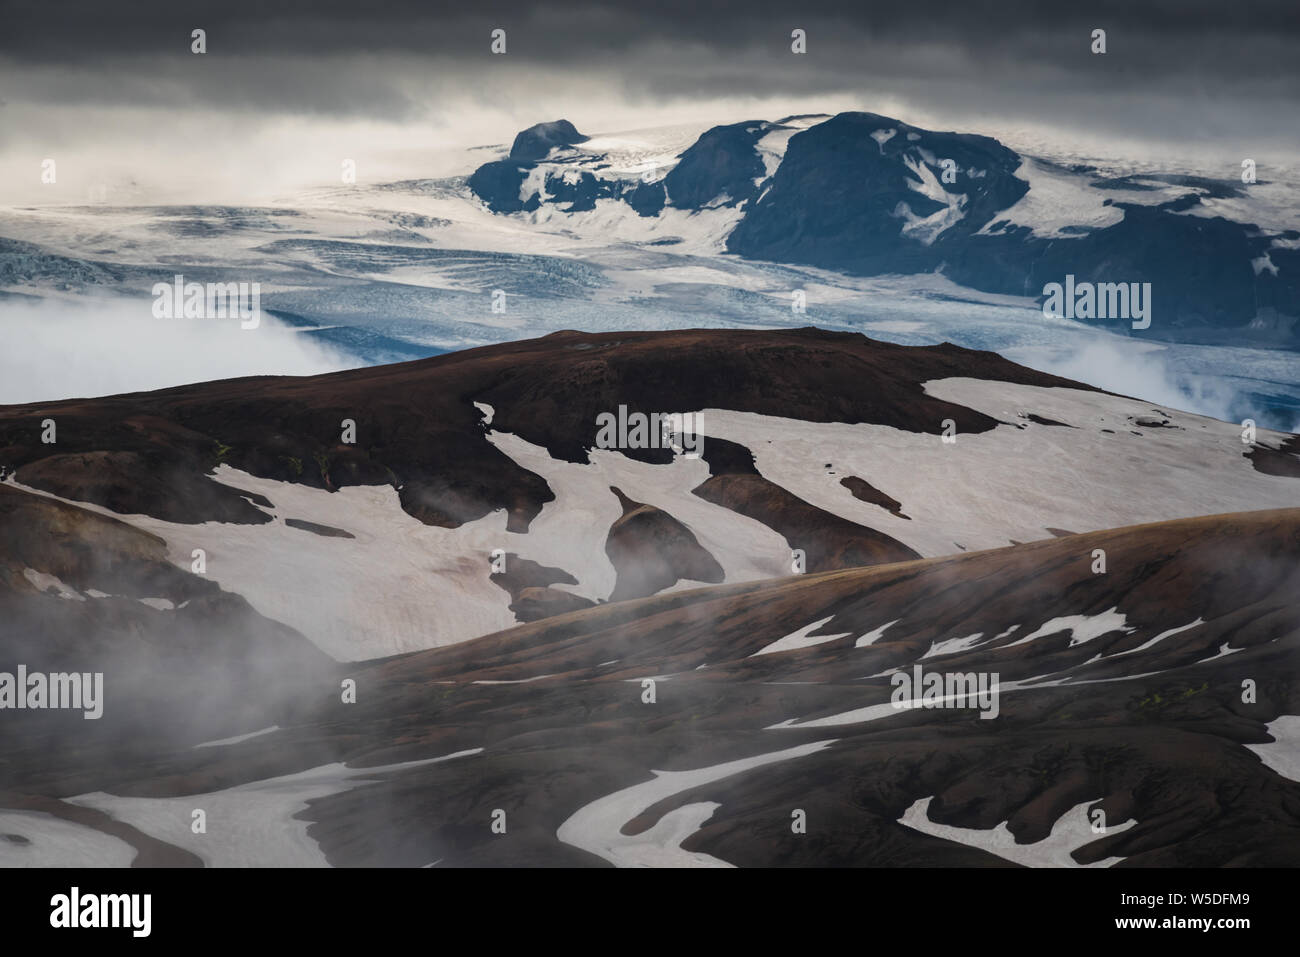 Volcanic and glacial scene in remote Iceland countryside Stock Photo